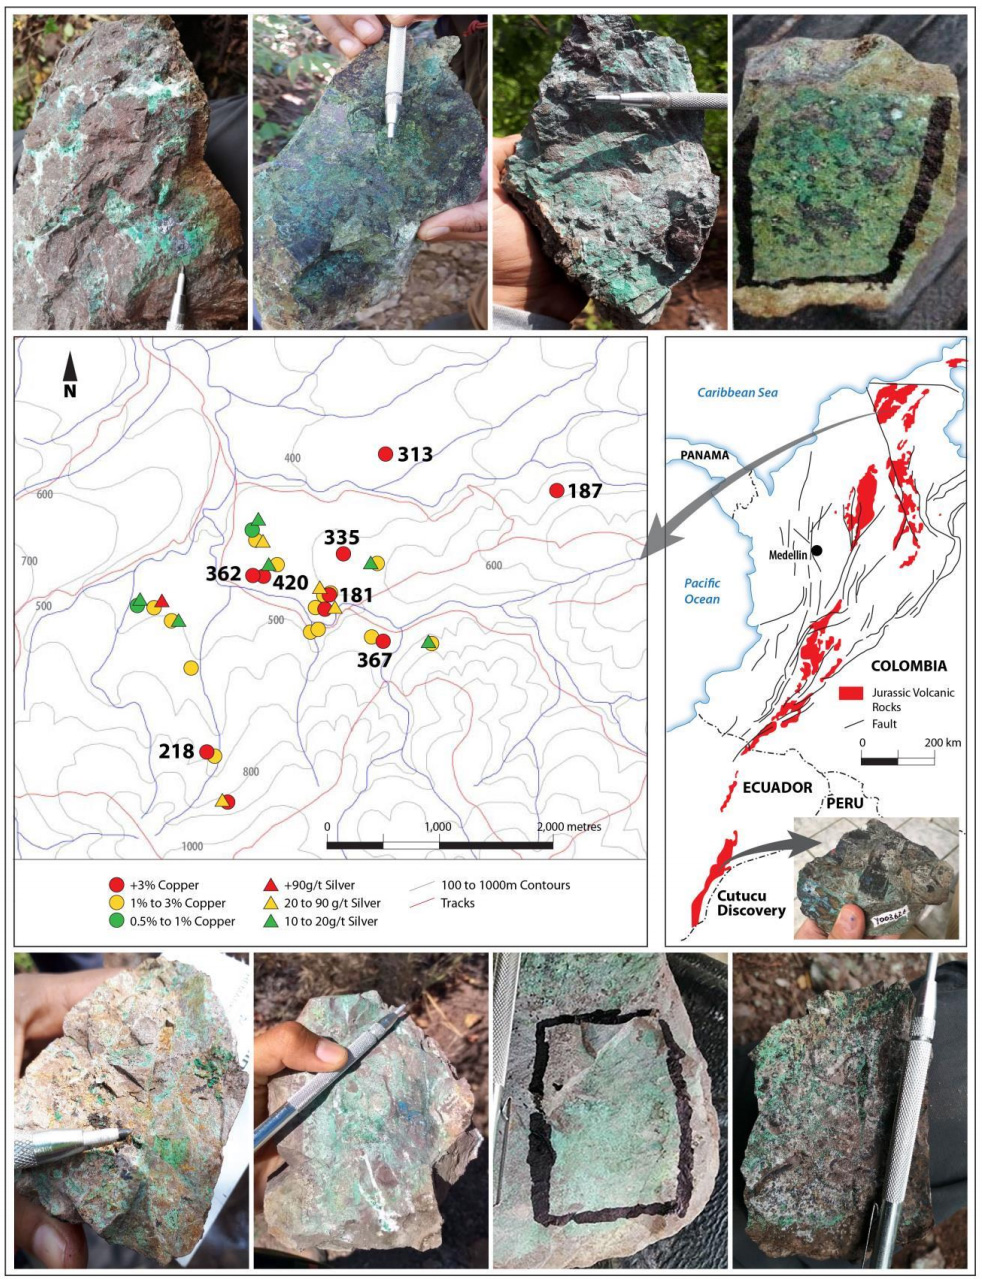 Figure 1. Mineralized samples from the Cesar copper-silver project with visible copper oxide mineralization.